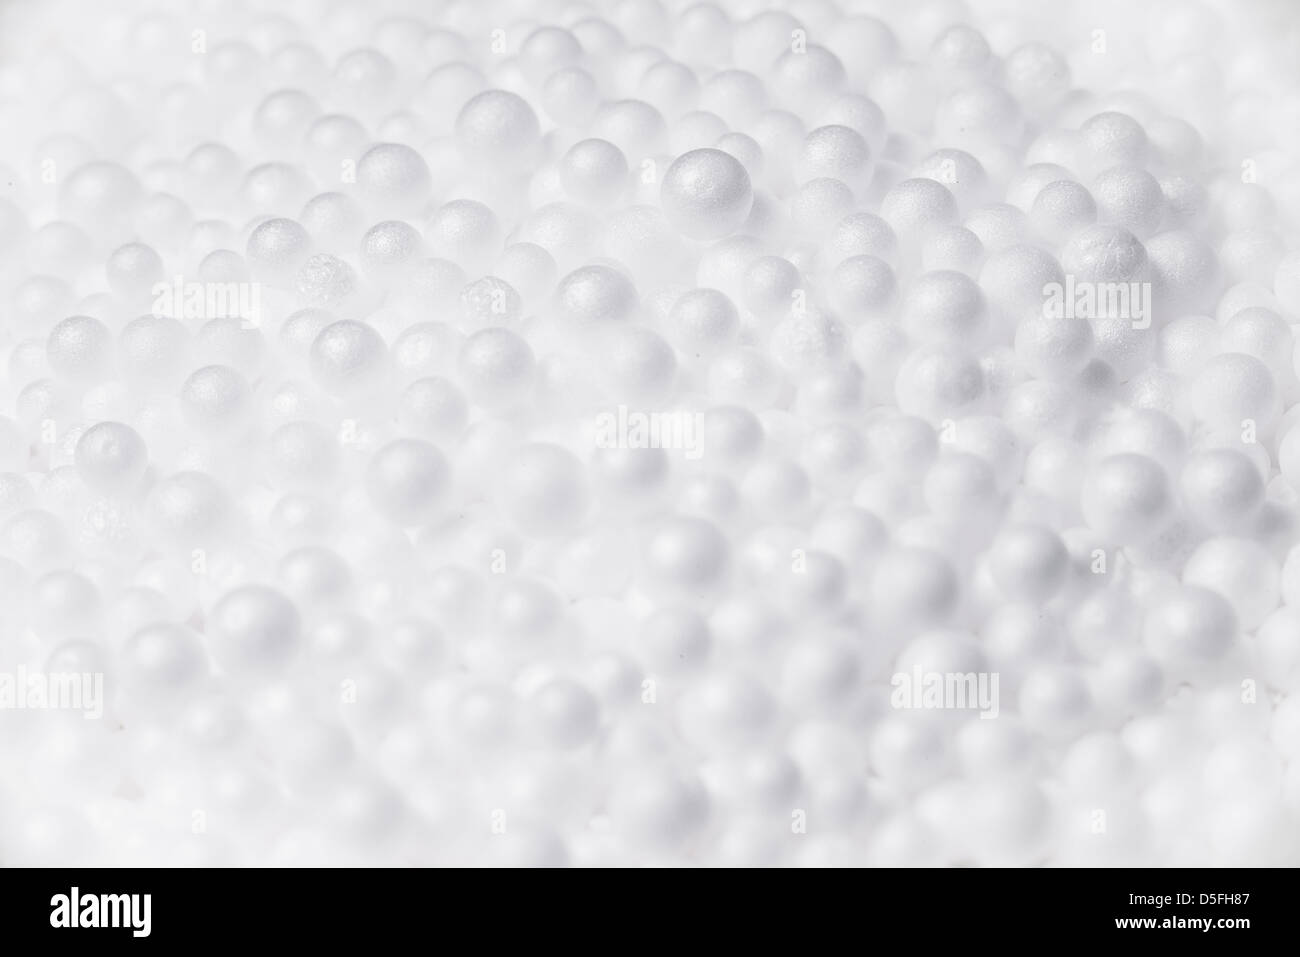 White abstract balls made from foam plastic Stock Photo